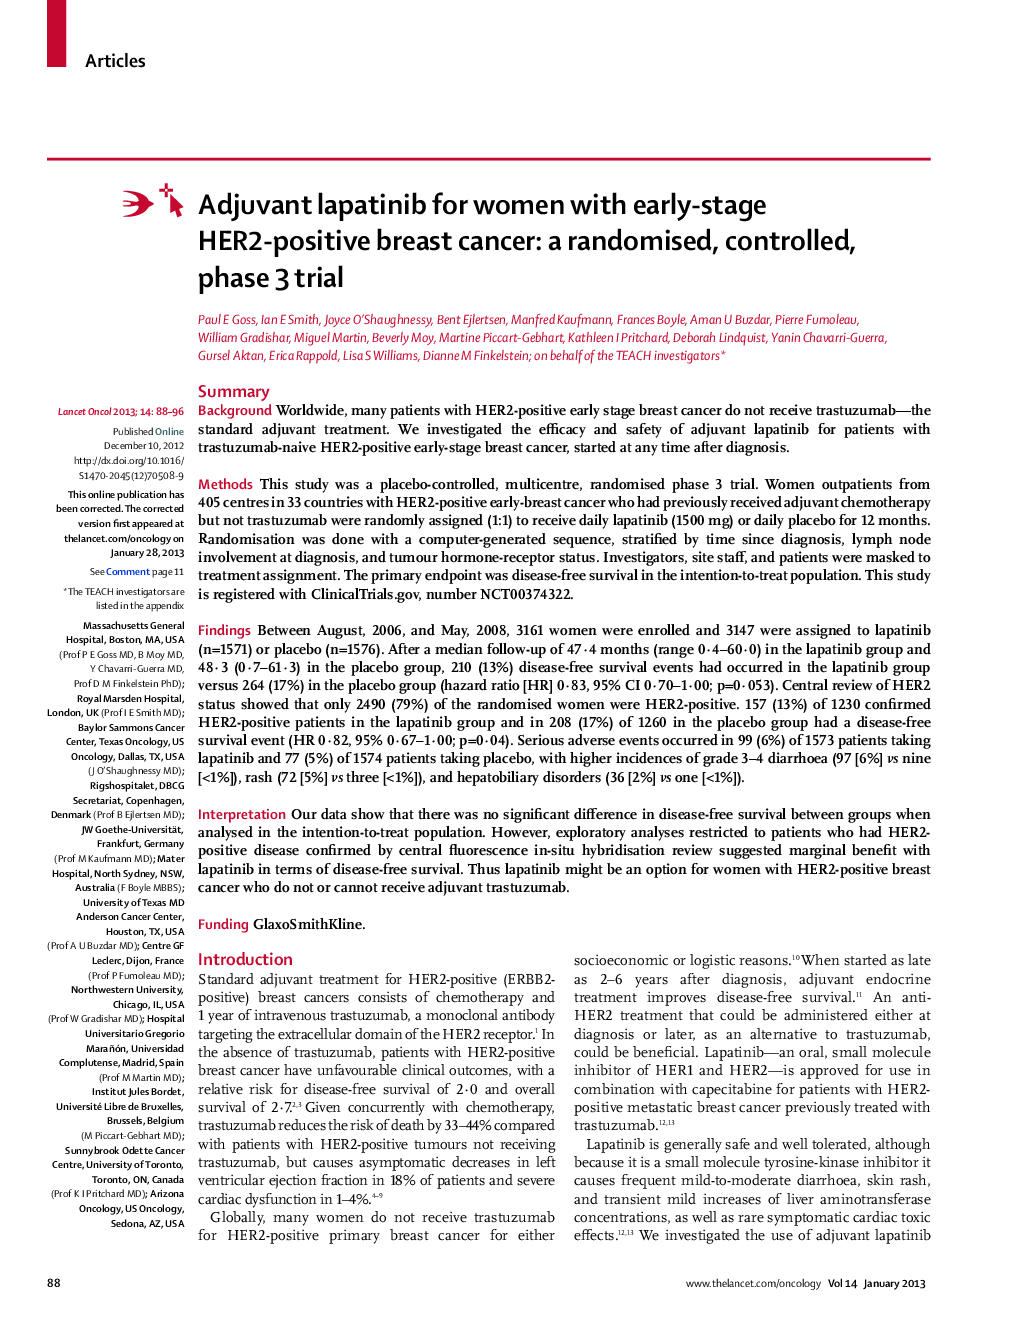 Adjuvant lapatinib for women with early-stage HER2-positive breast cancer: a randomised, controlled, phase 3 trial